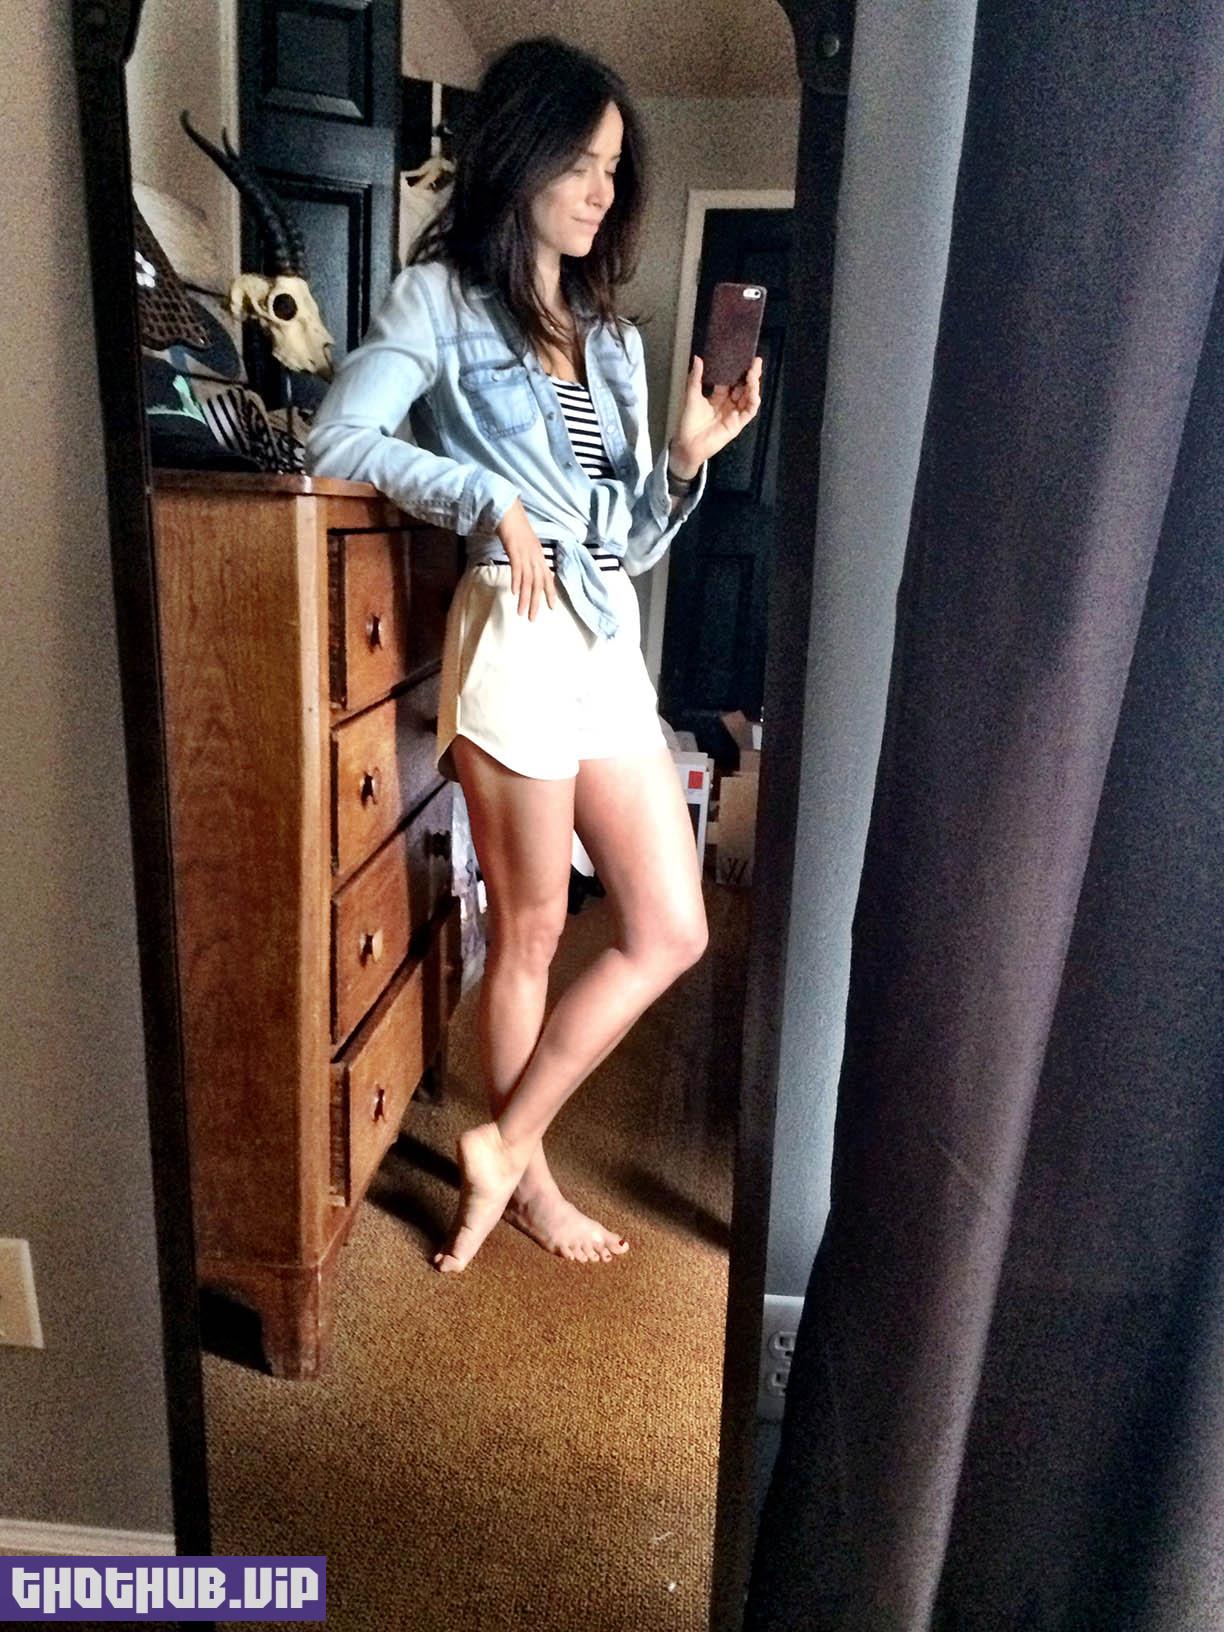 Timeless Star Actress Abigail Spencer Leaked Nudes and Masturbation VIDEOS